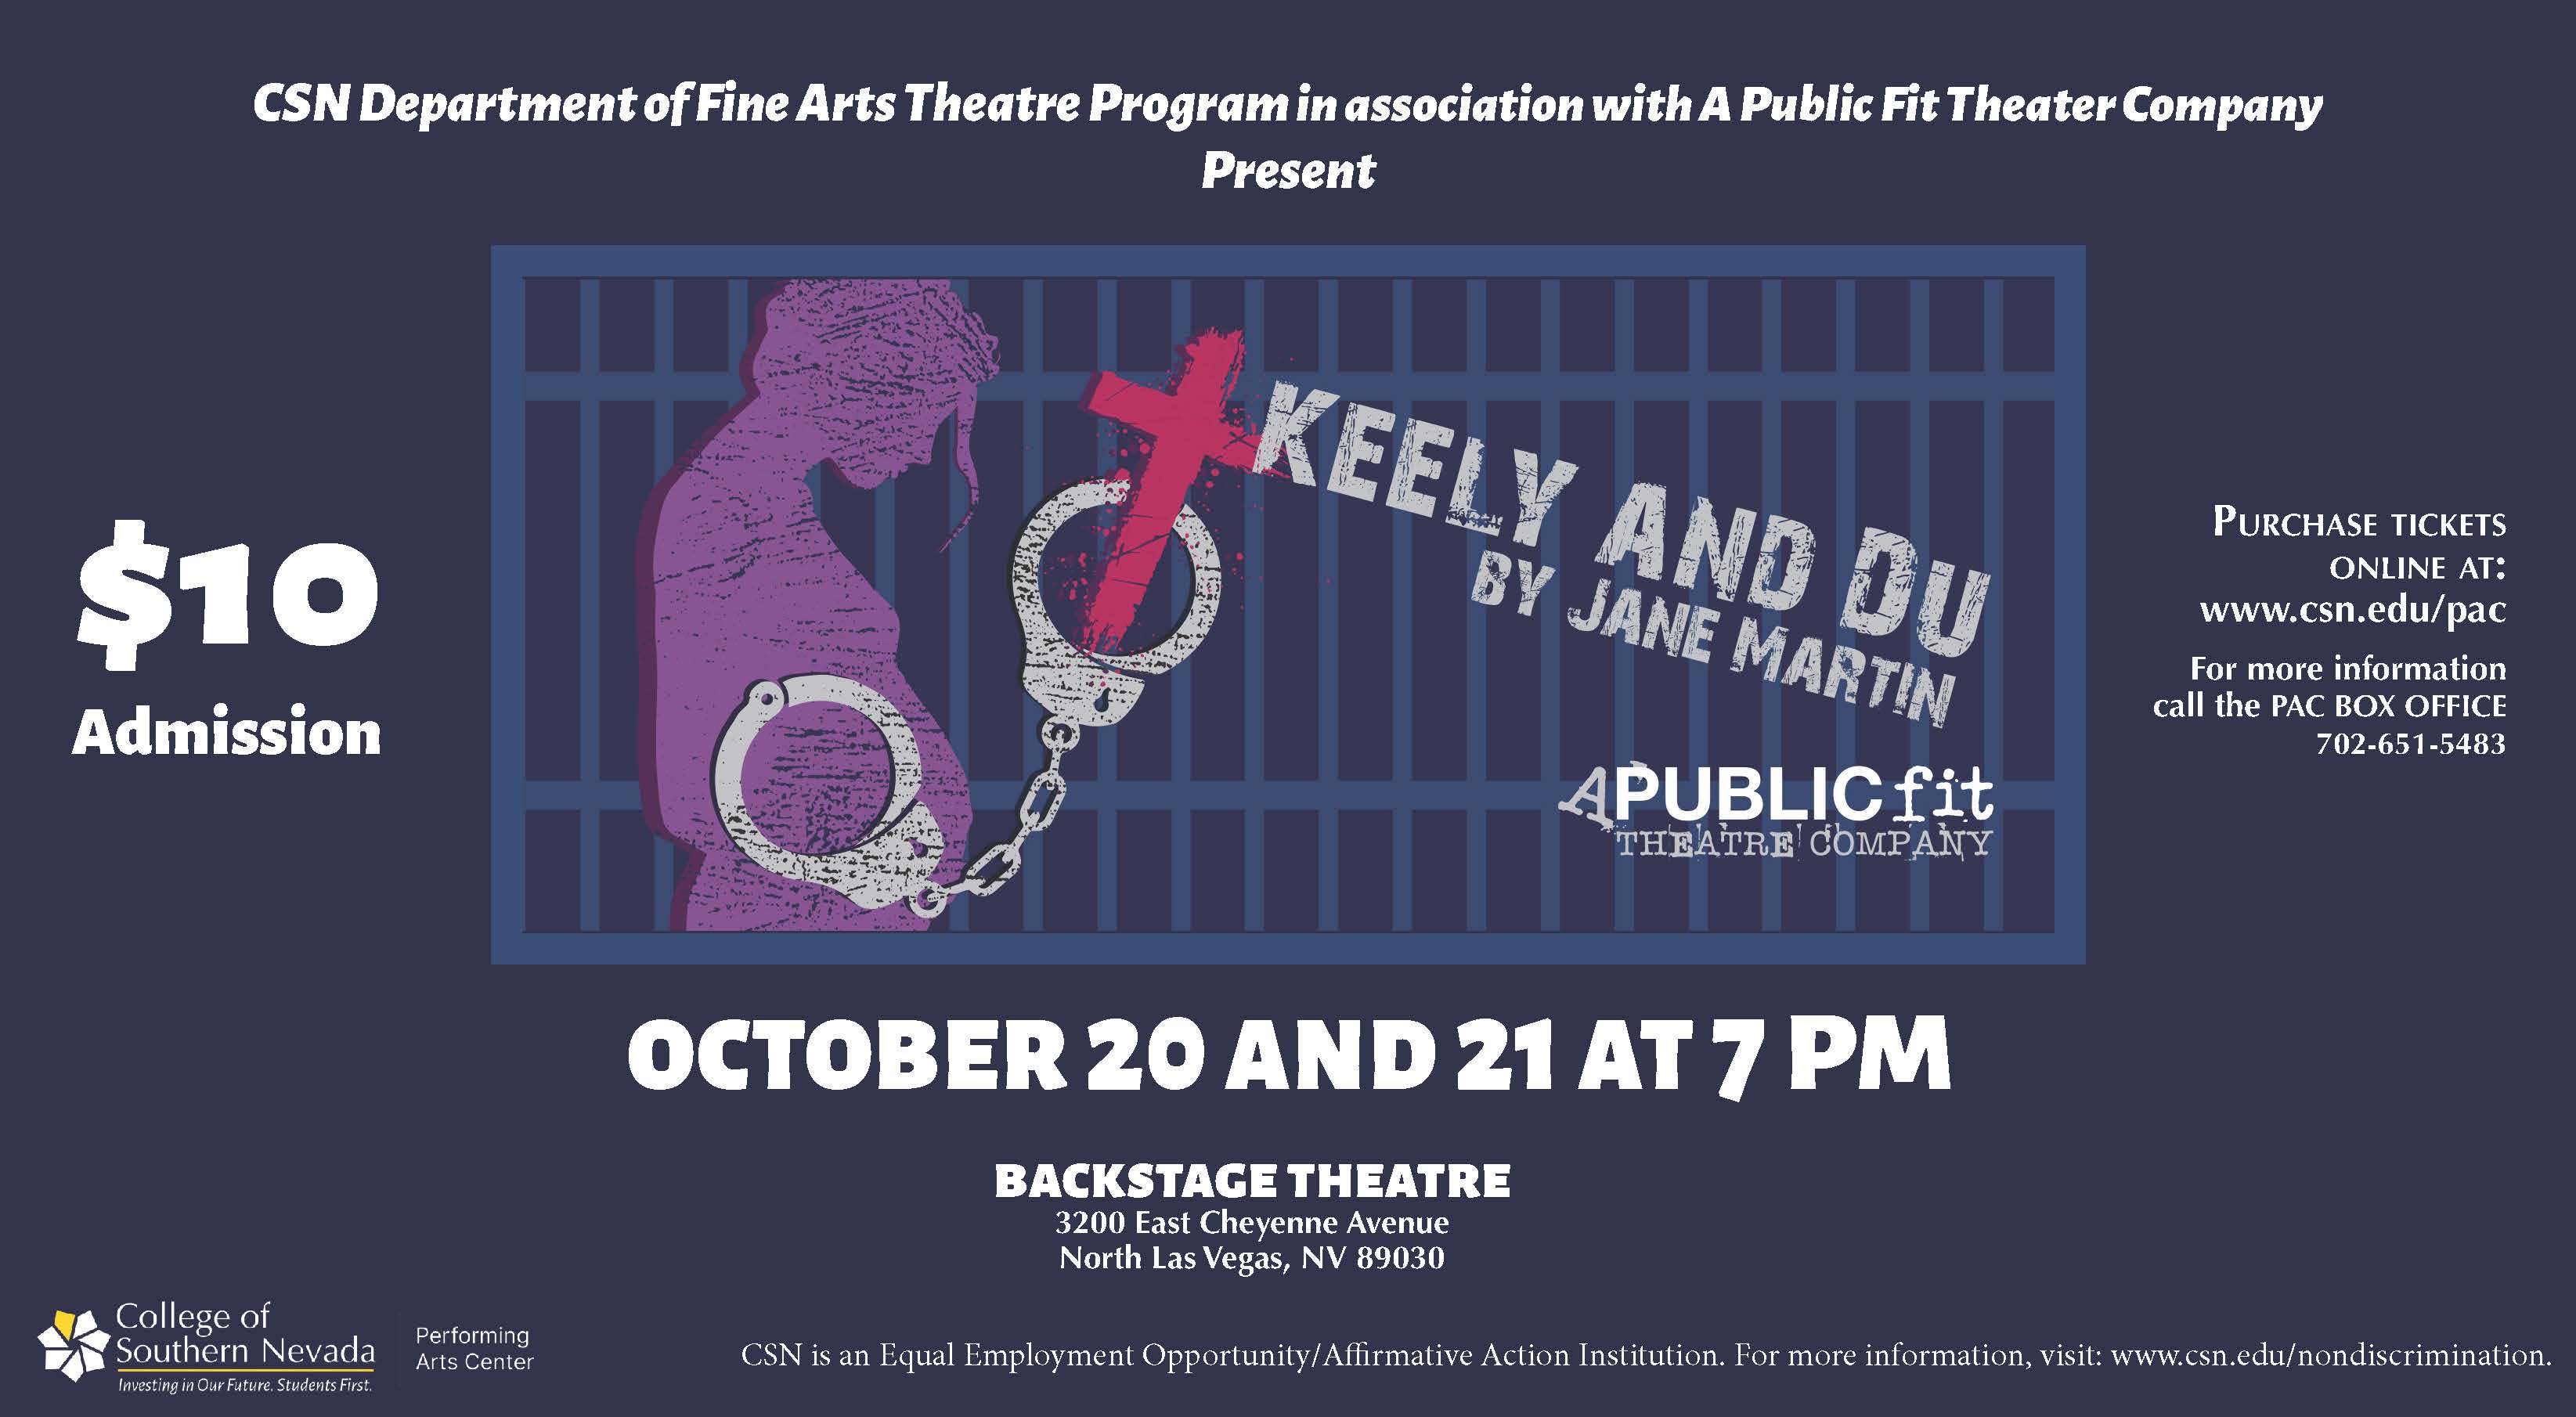 Keely and Du by Jane Martin, October 20 & 21 at 7pm.